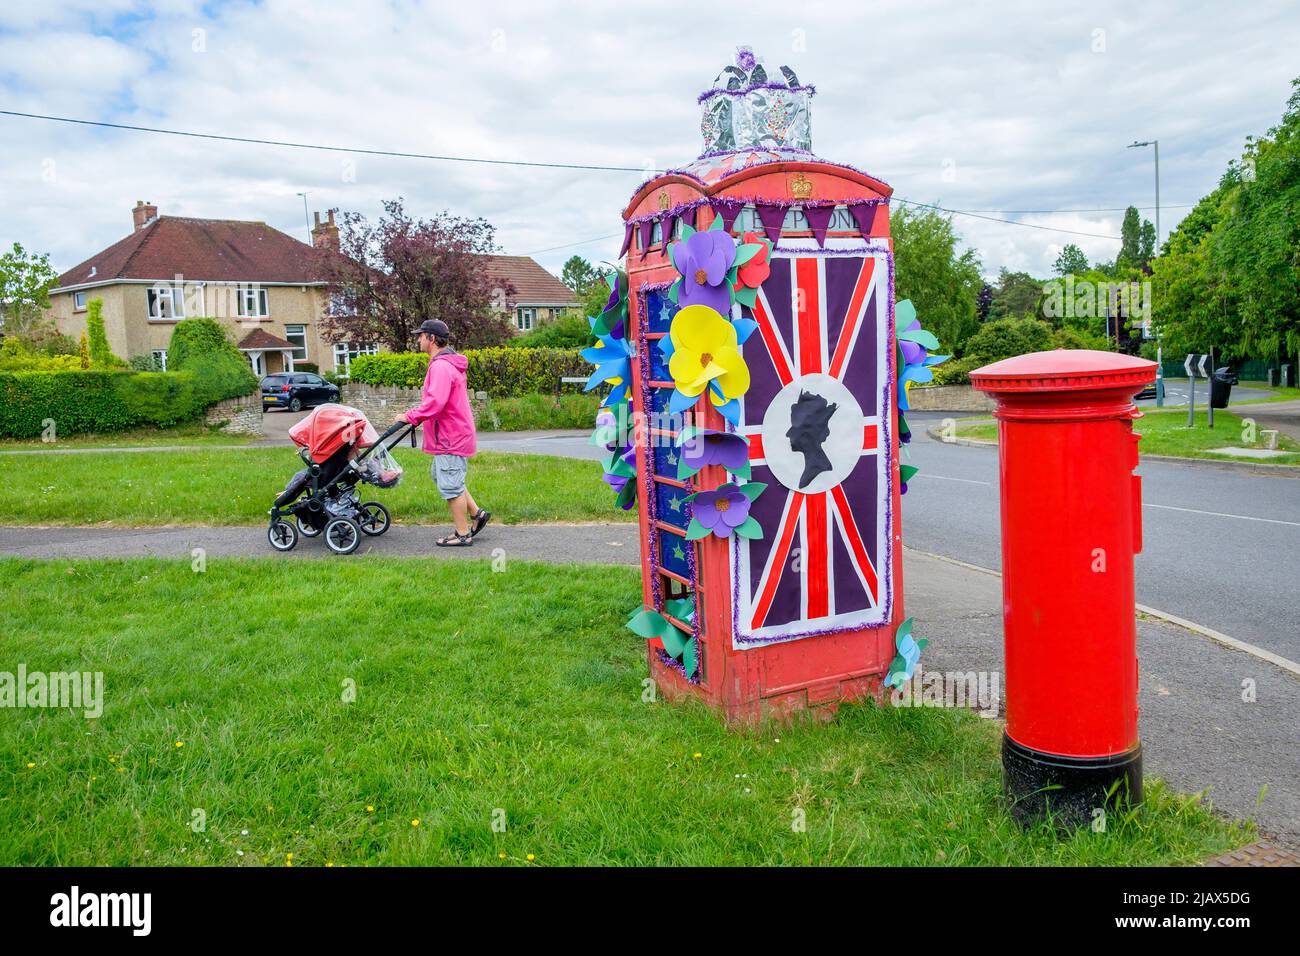 Chippenham, Wiltshire, UK. 1st June, 2022. A day before the long bank holiday weekend starts, a man pushing a child in a buggy is pictured as he walks past a phone box that has been decorated to celebrate the Queen's Platinum Jubilee.  Credit: Lynchpics/Alamy Live News Stock Photo